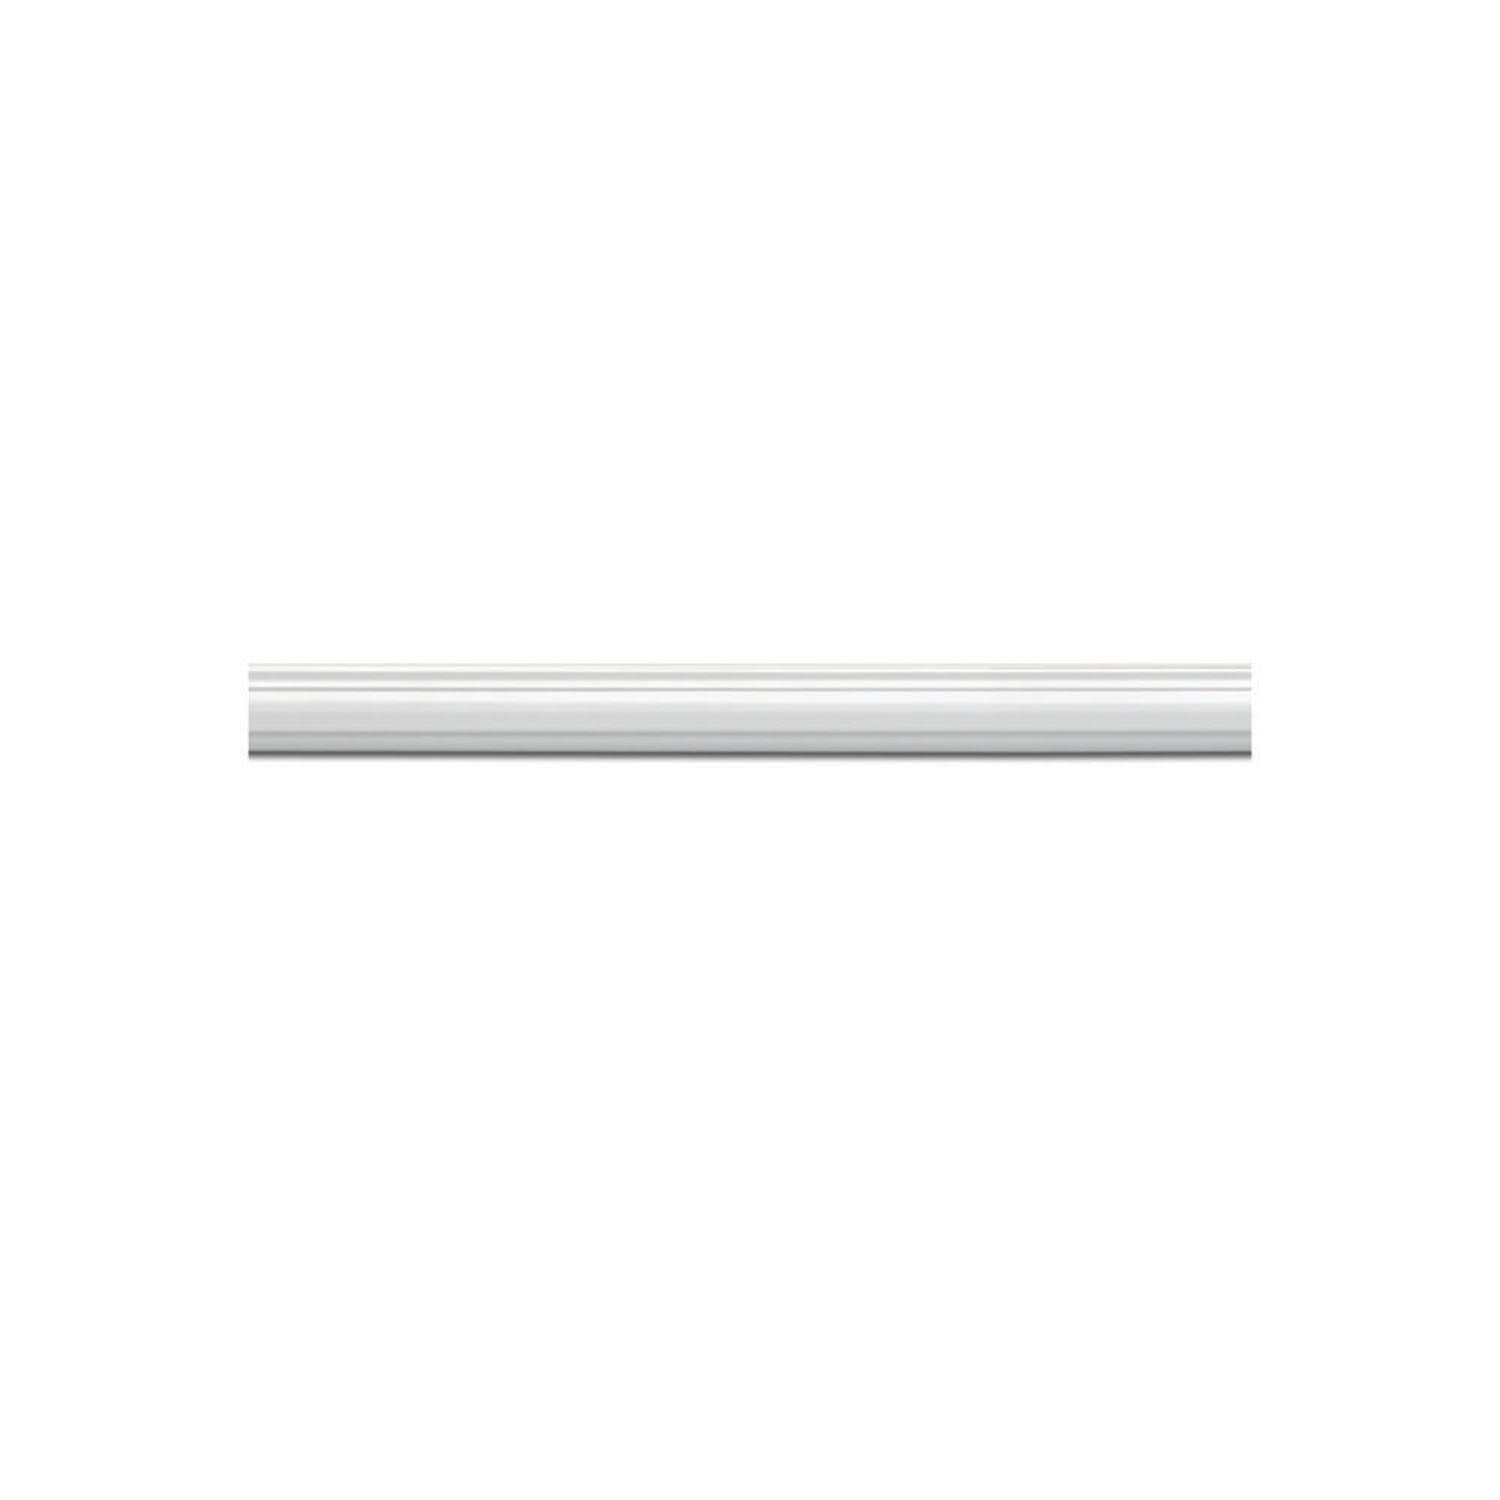 Focal Point Lighting 10590-8 Panel System A Panel Moulding Decor White